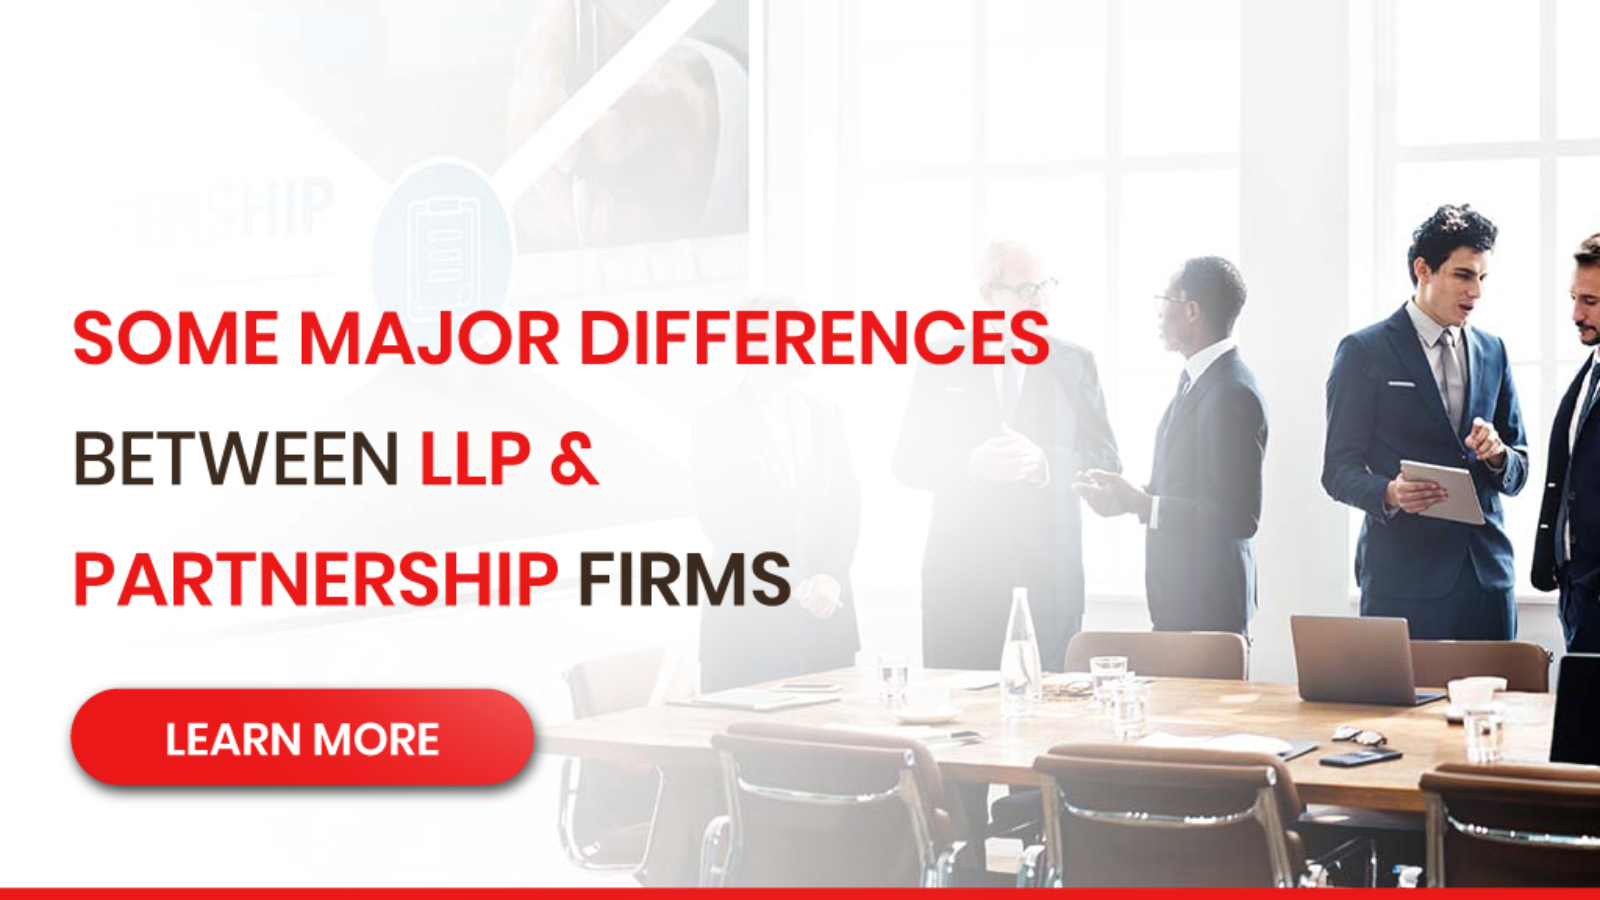 Some Major Differences Between LLP & Partnership Firms